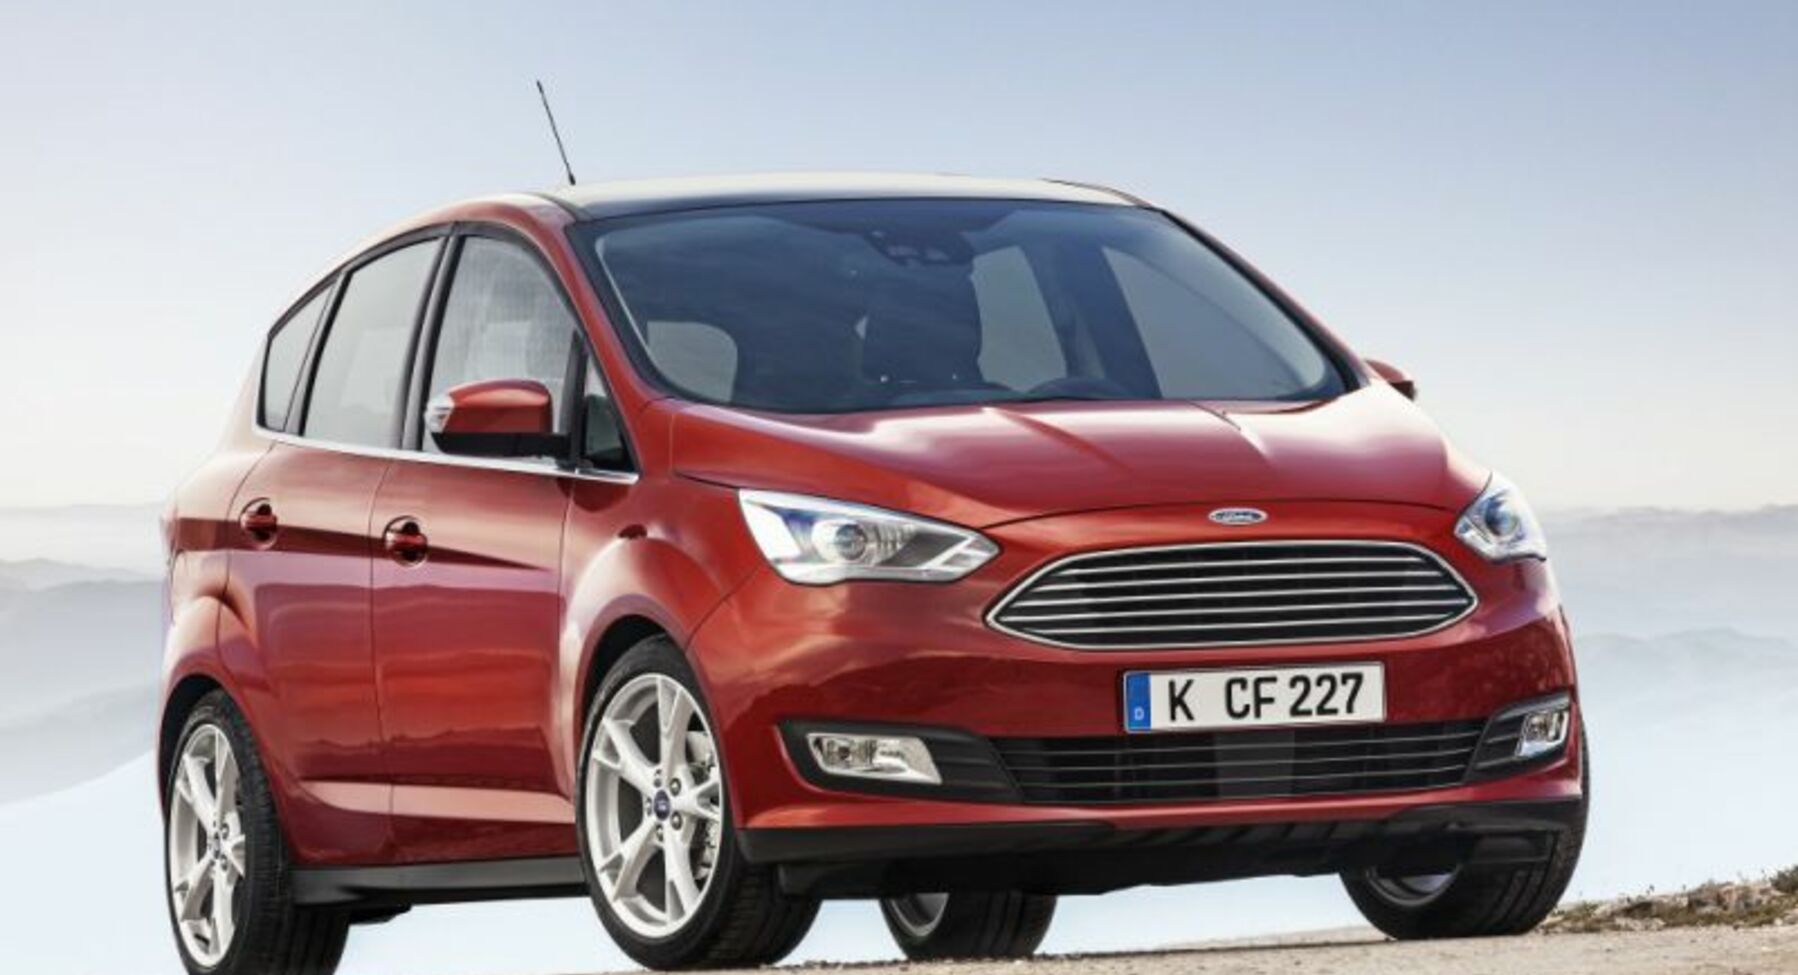 Ford C-MAX II (facelift 2015) 1.5 TDCi (95 Hp) S&S 2015, 2016, 2017, 2018, 2019, 2020, 2021 